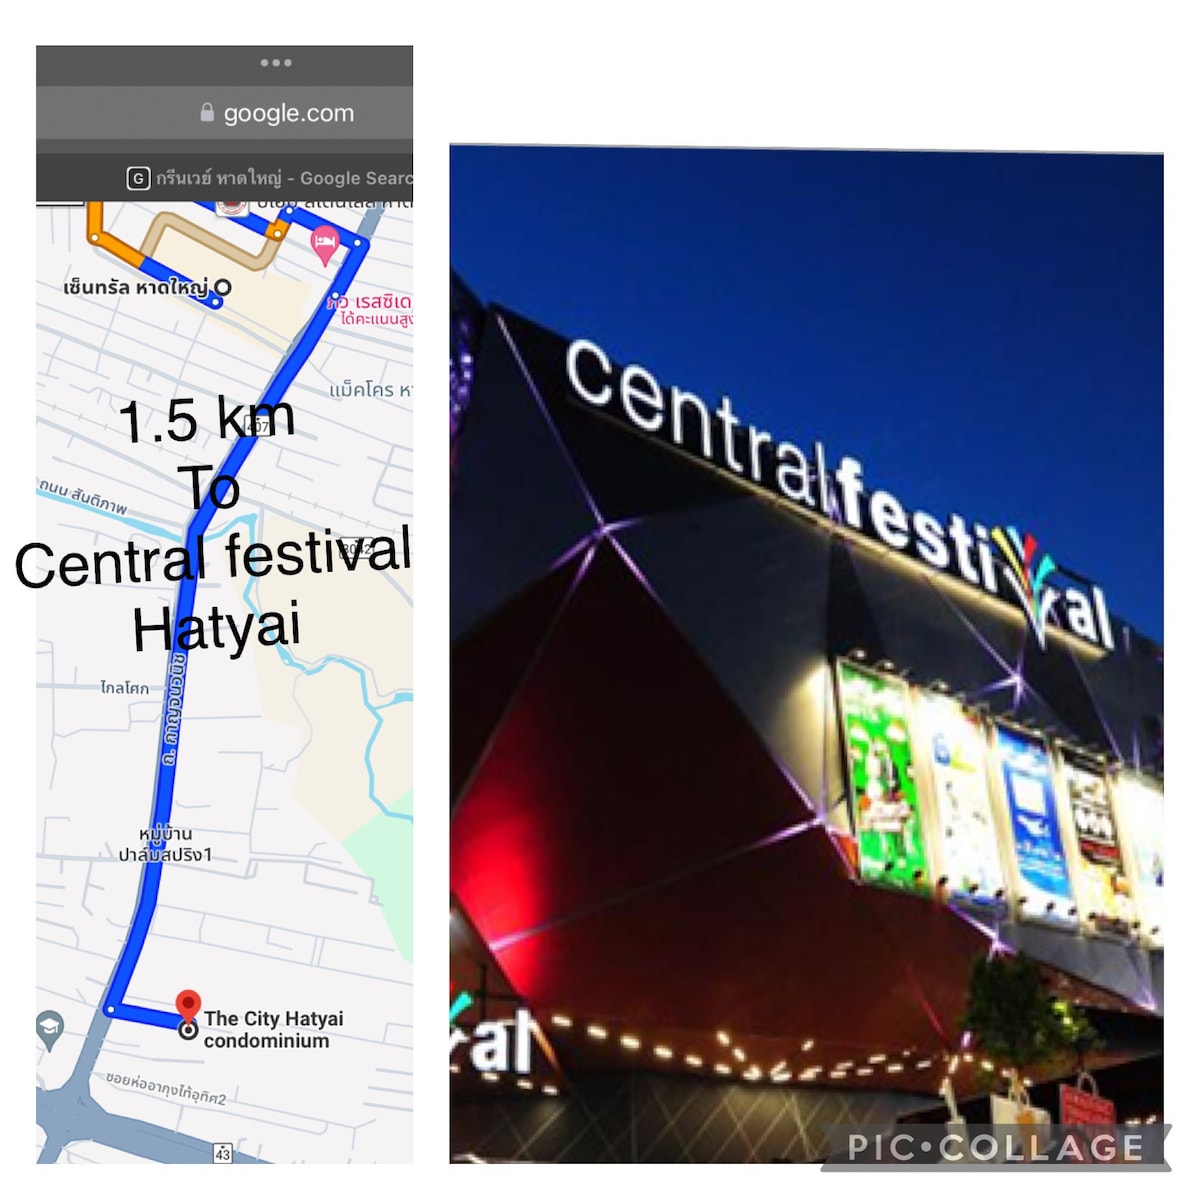 501B #1km to central festival #5 km to lee garden